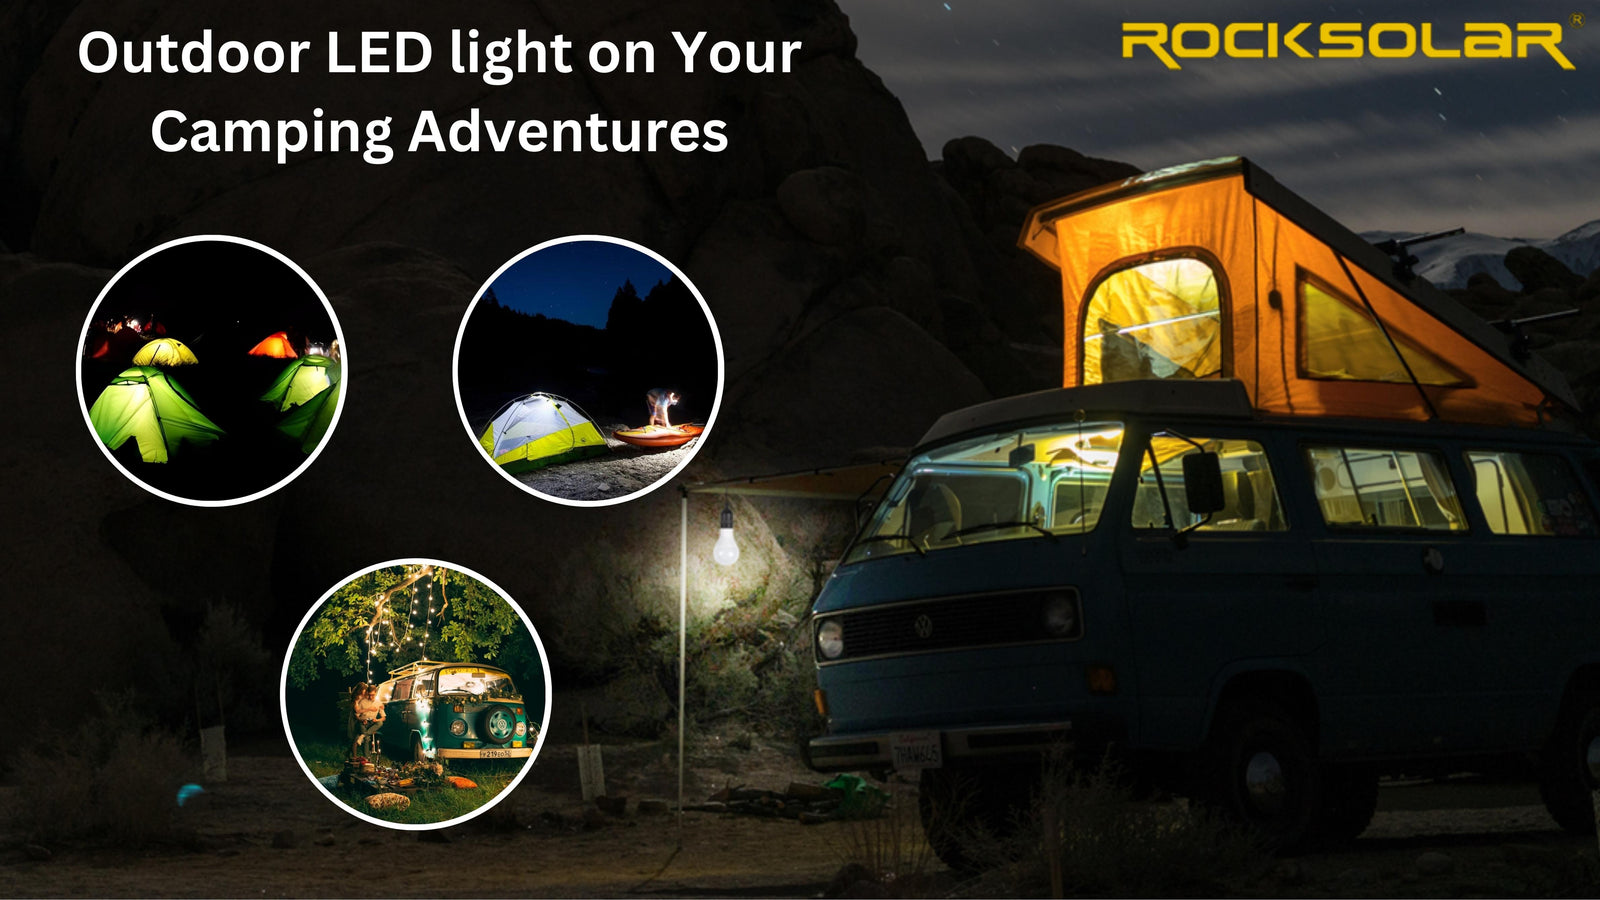 Reasons you need an outdoor LED light on your camping adventures